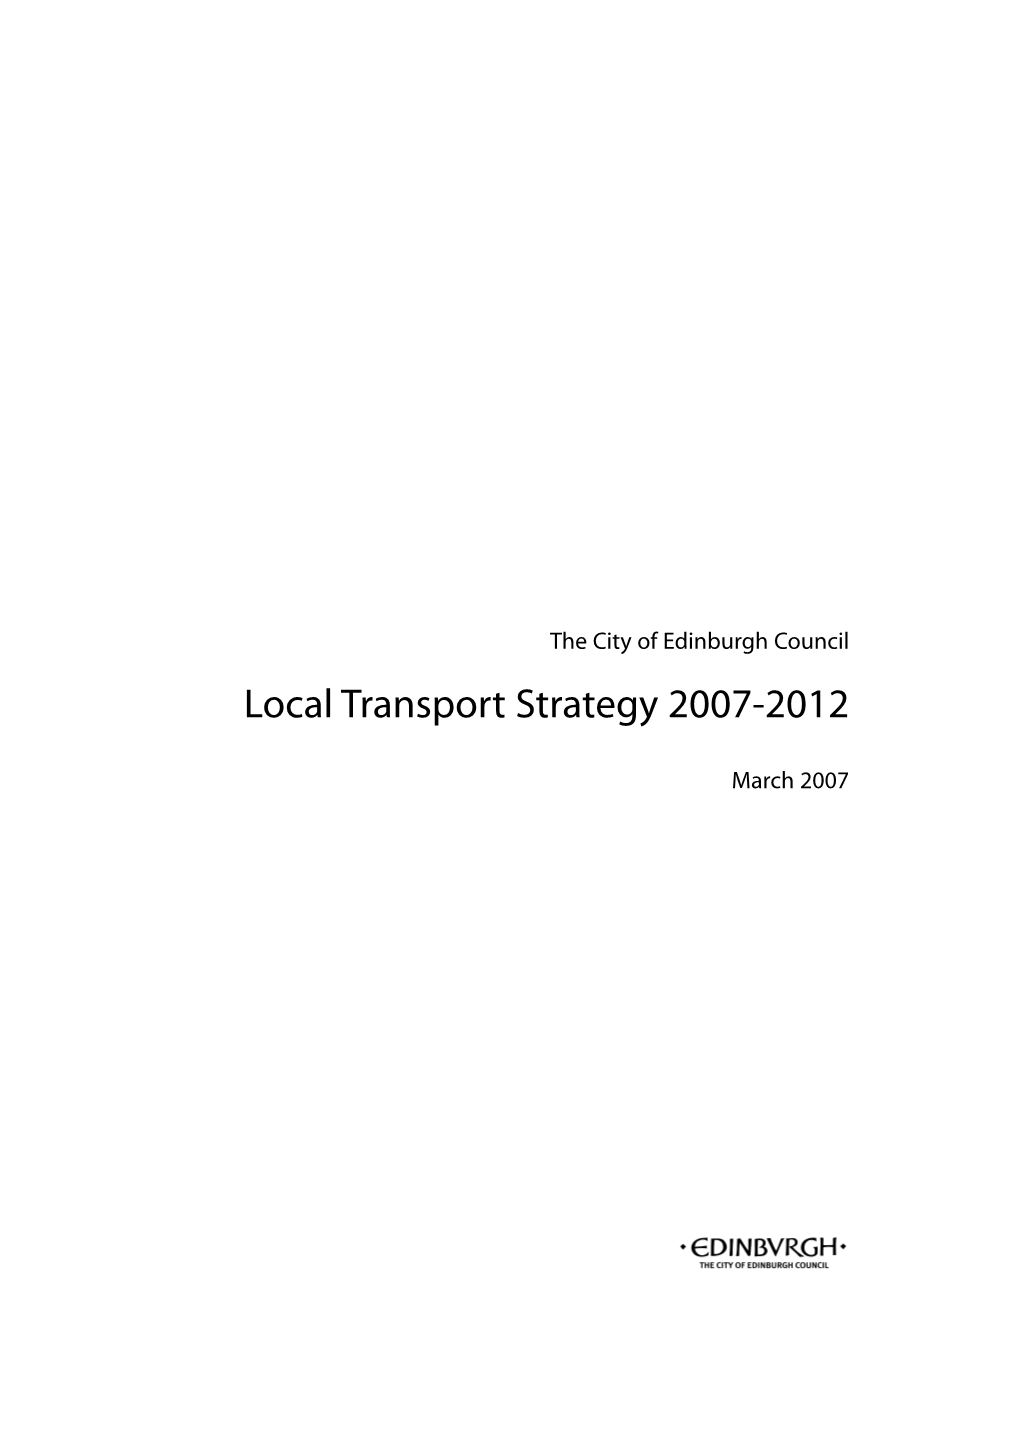 Local Transport Strategy 2007-2012